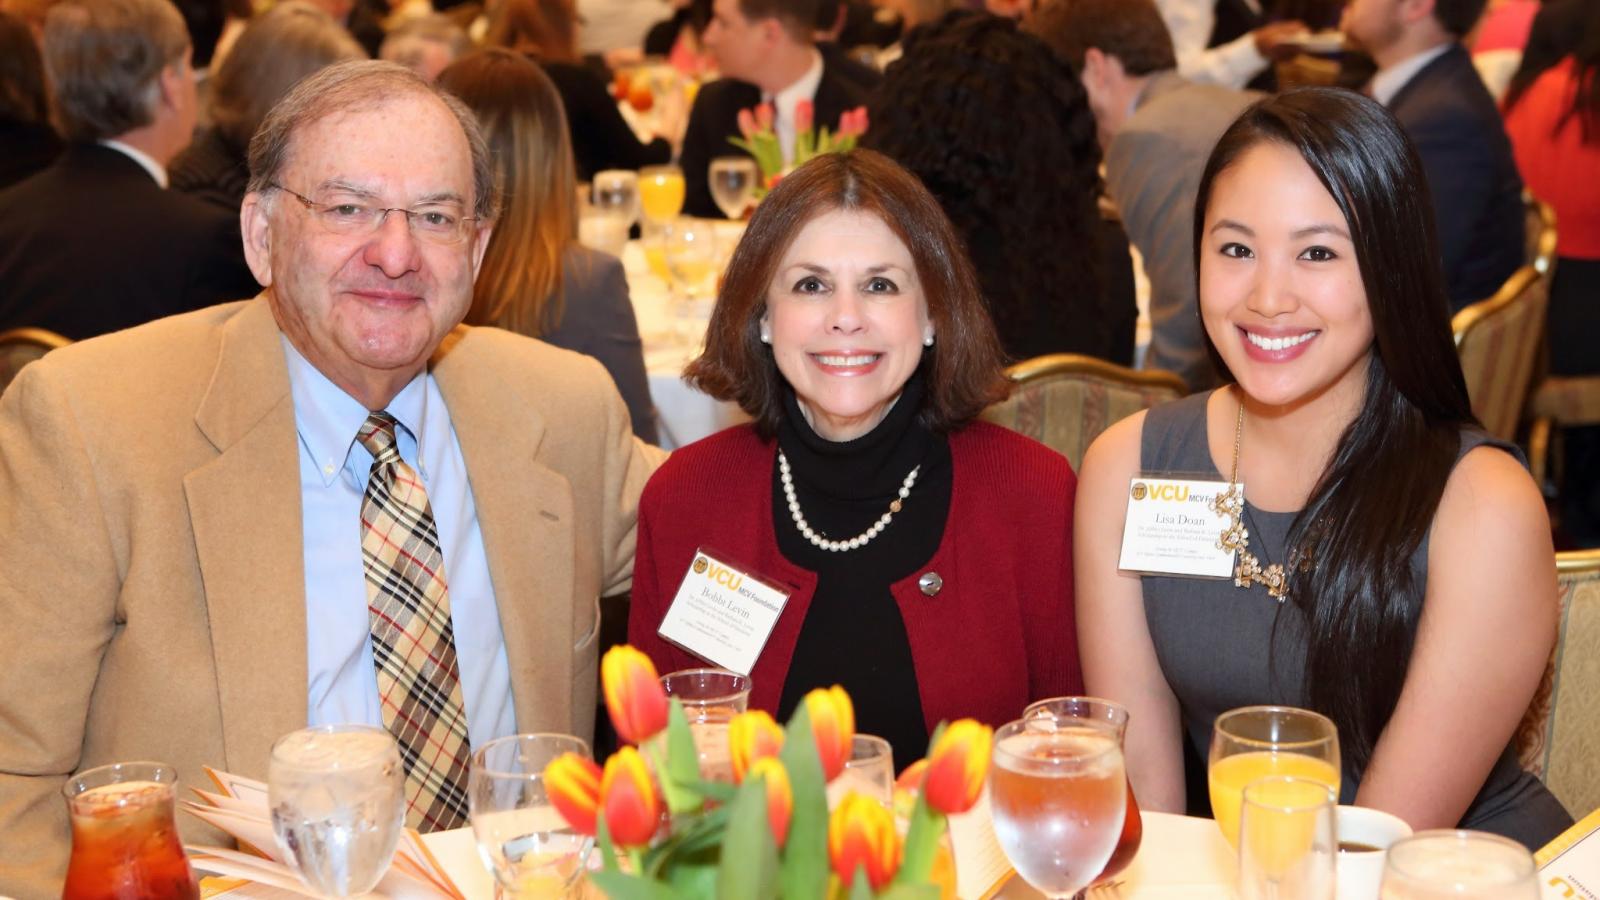 Brunch attendees at the 10th Annual Endowed Scholarship Brunch